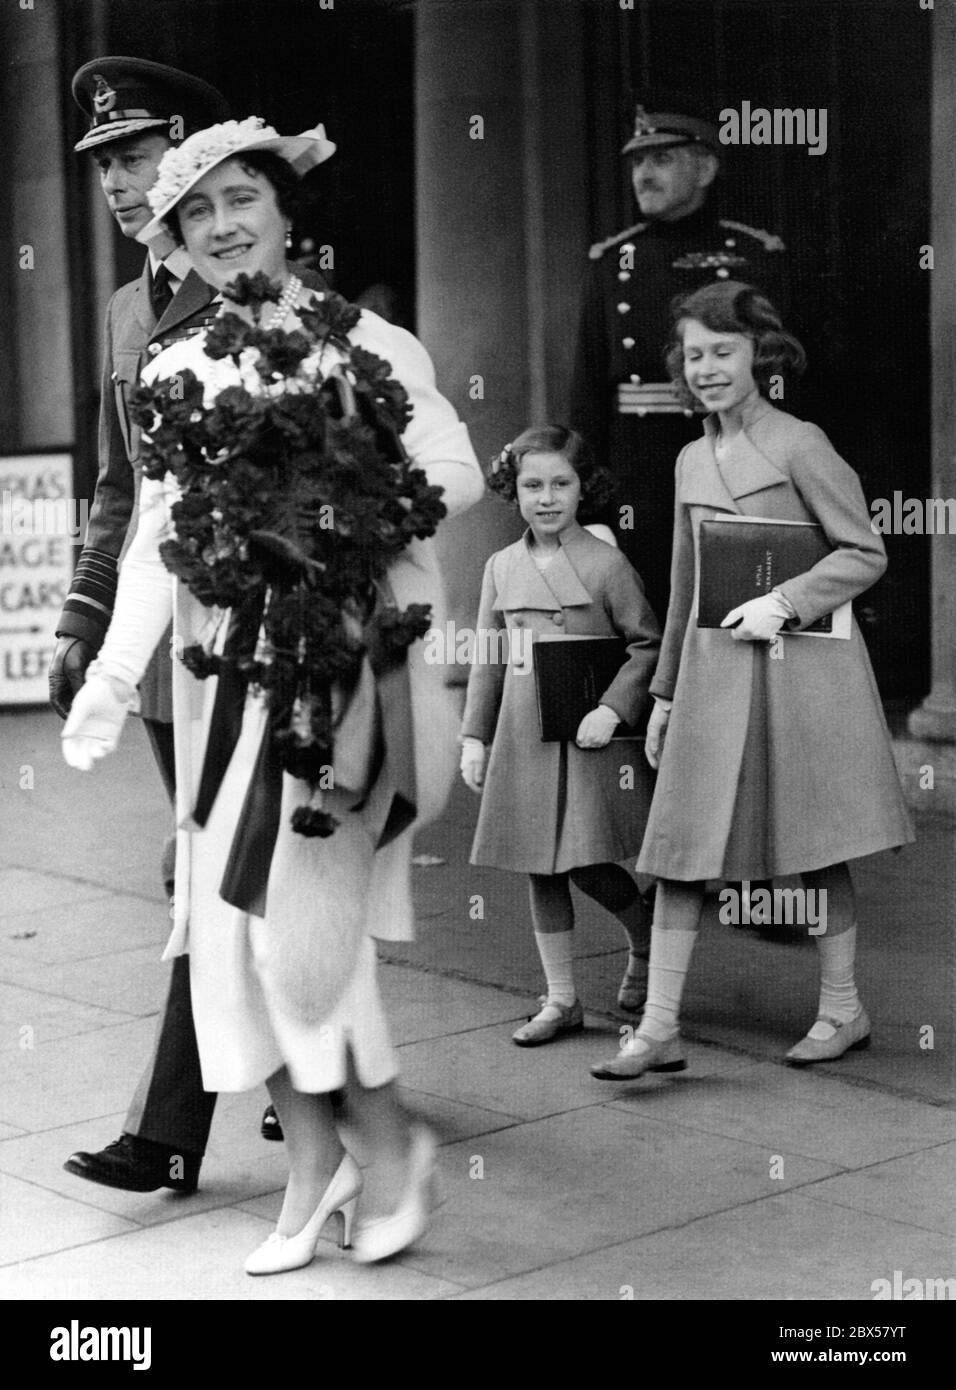 Elizabeth II (right) leaves the opening ceremony of the Coronation Royal Tournament in Olympia, London, accompanied by Queen Elizabeth (left) carrying a large bouquet of flowers, King George V and Princess Margaret Rose (centre). Stock Photo